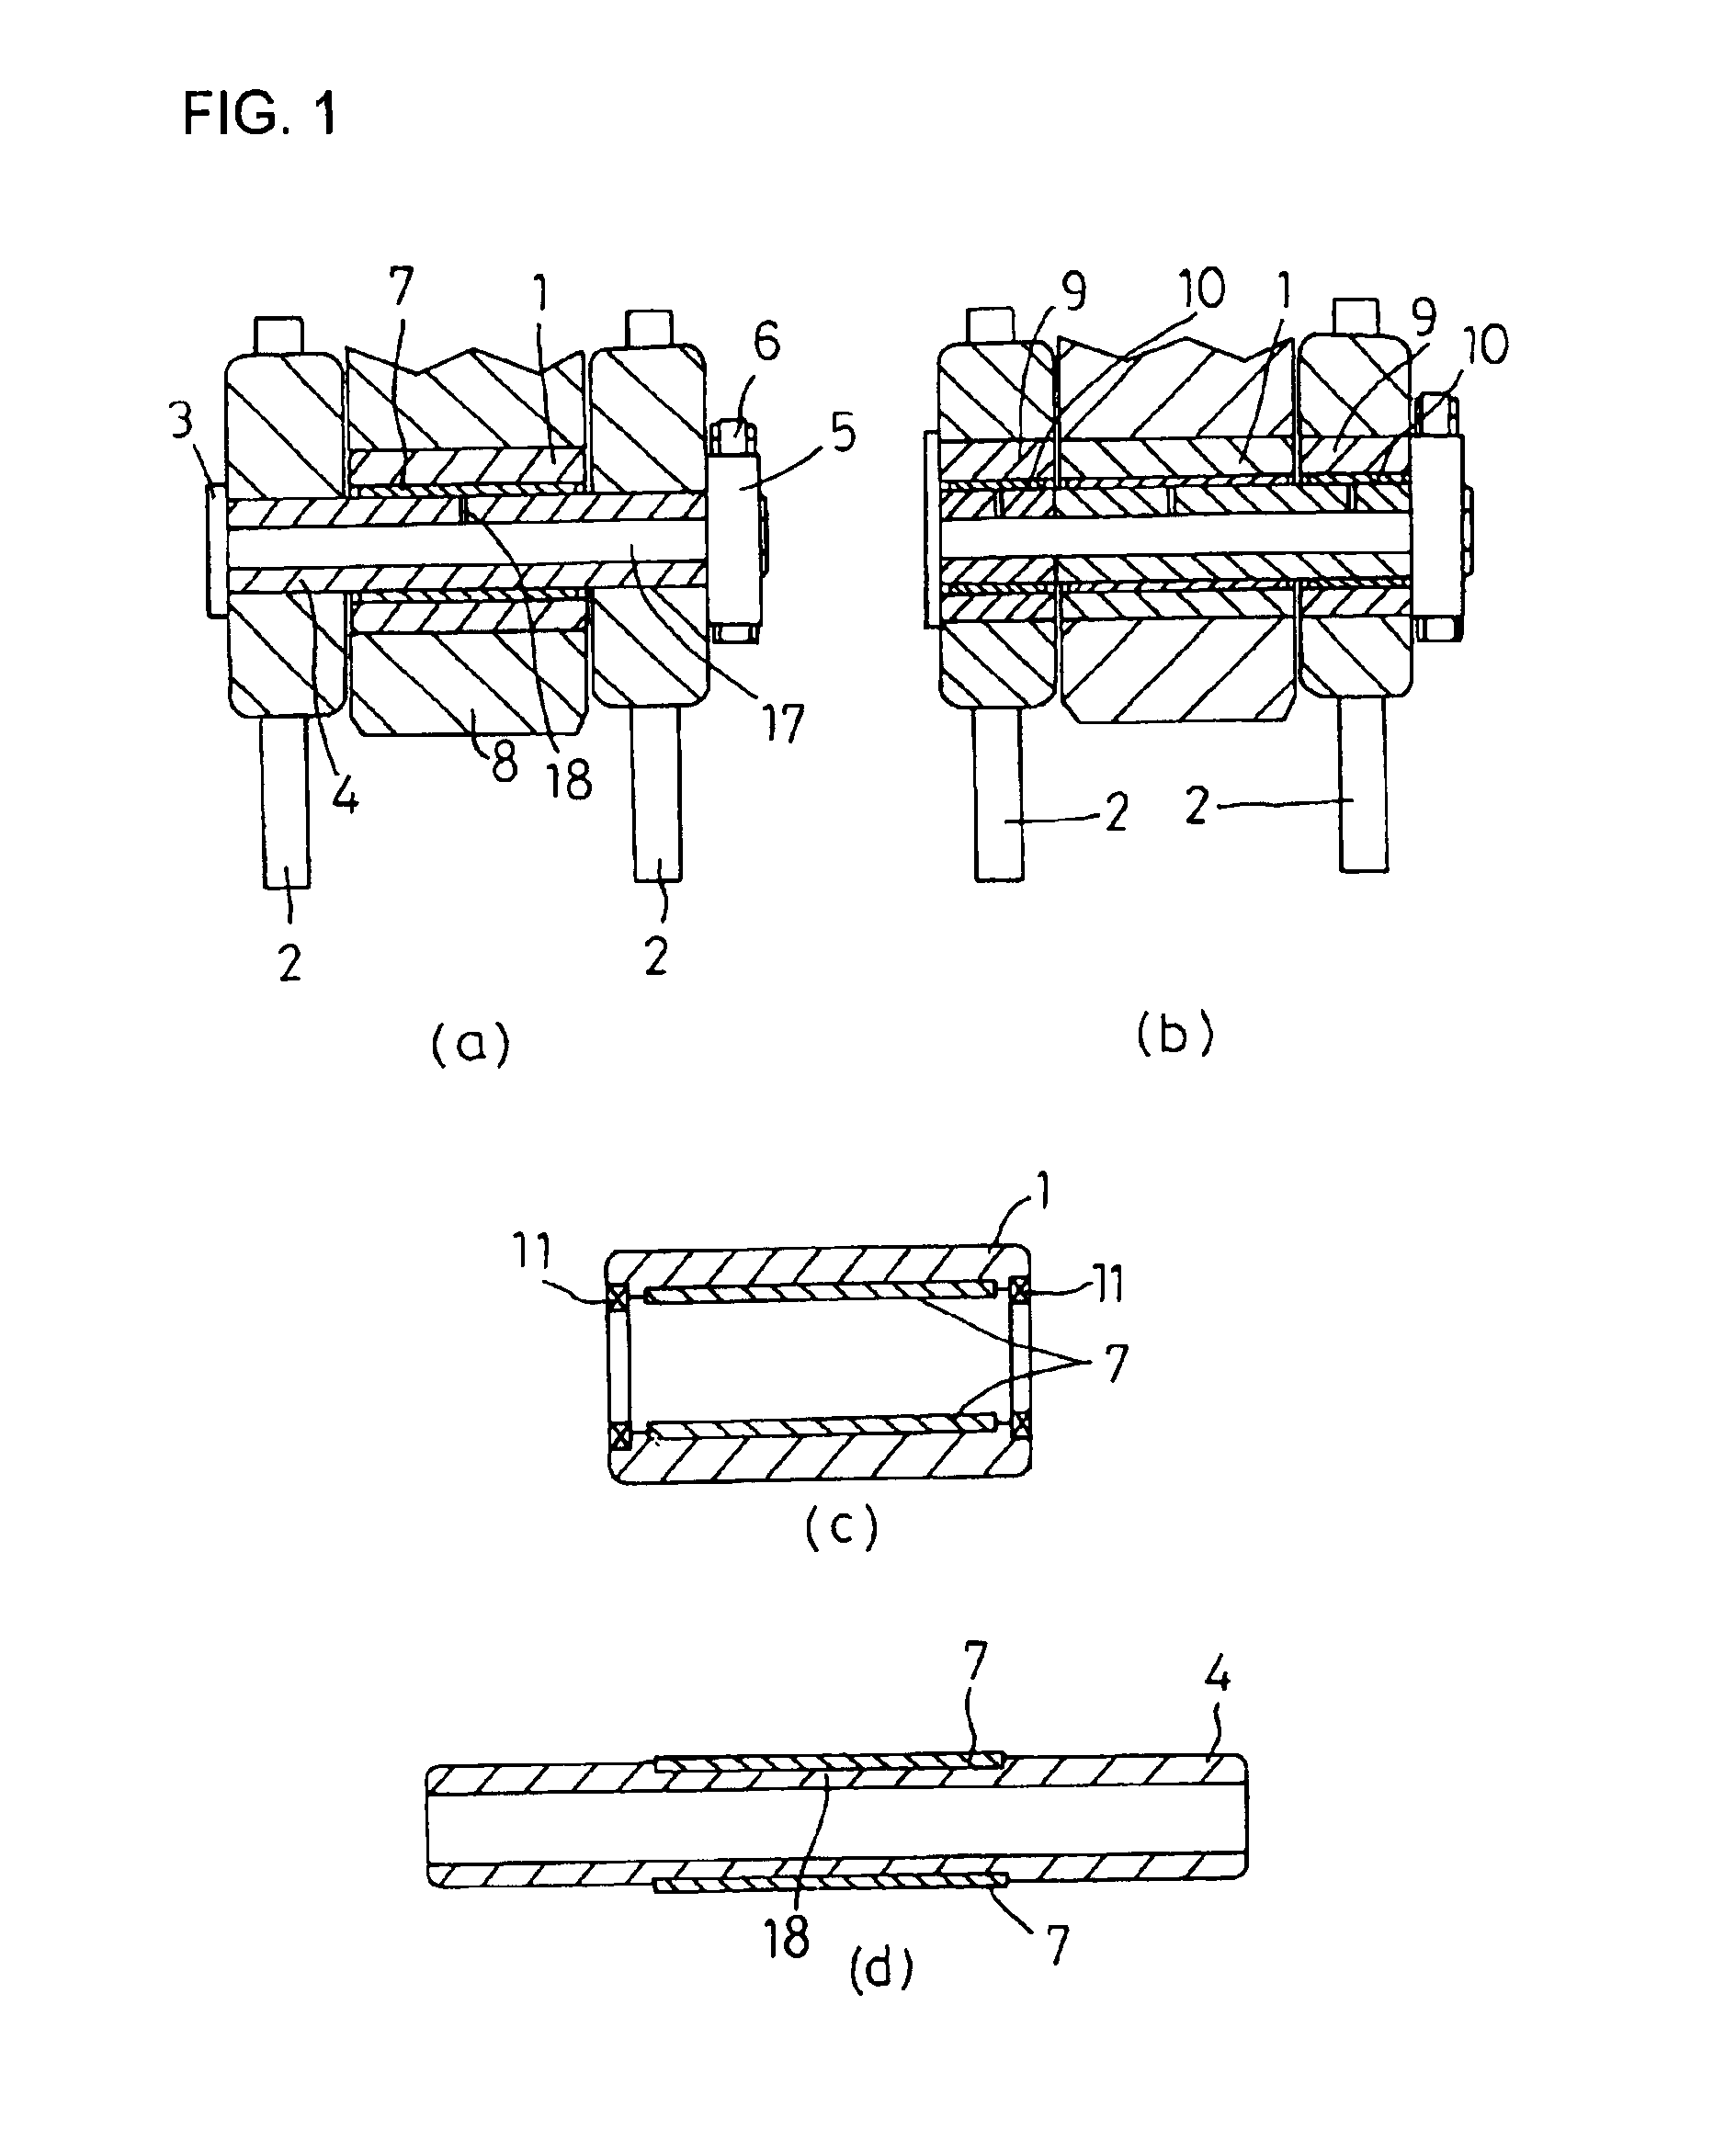 Coupling device for equipment implement